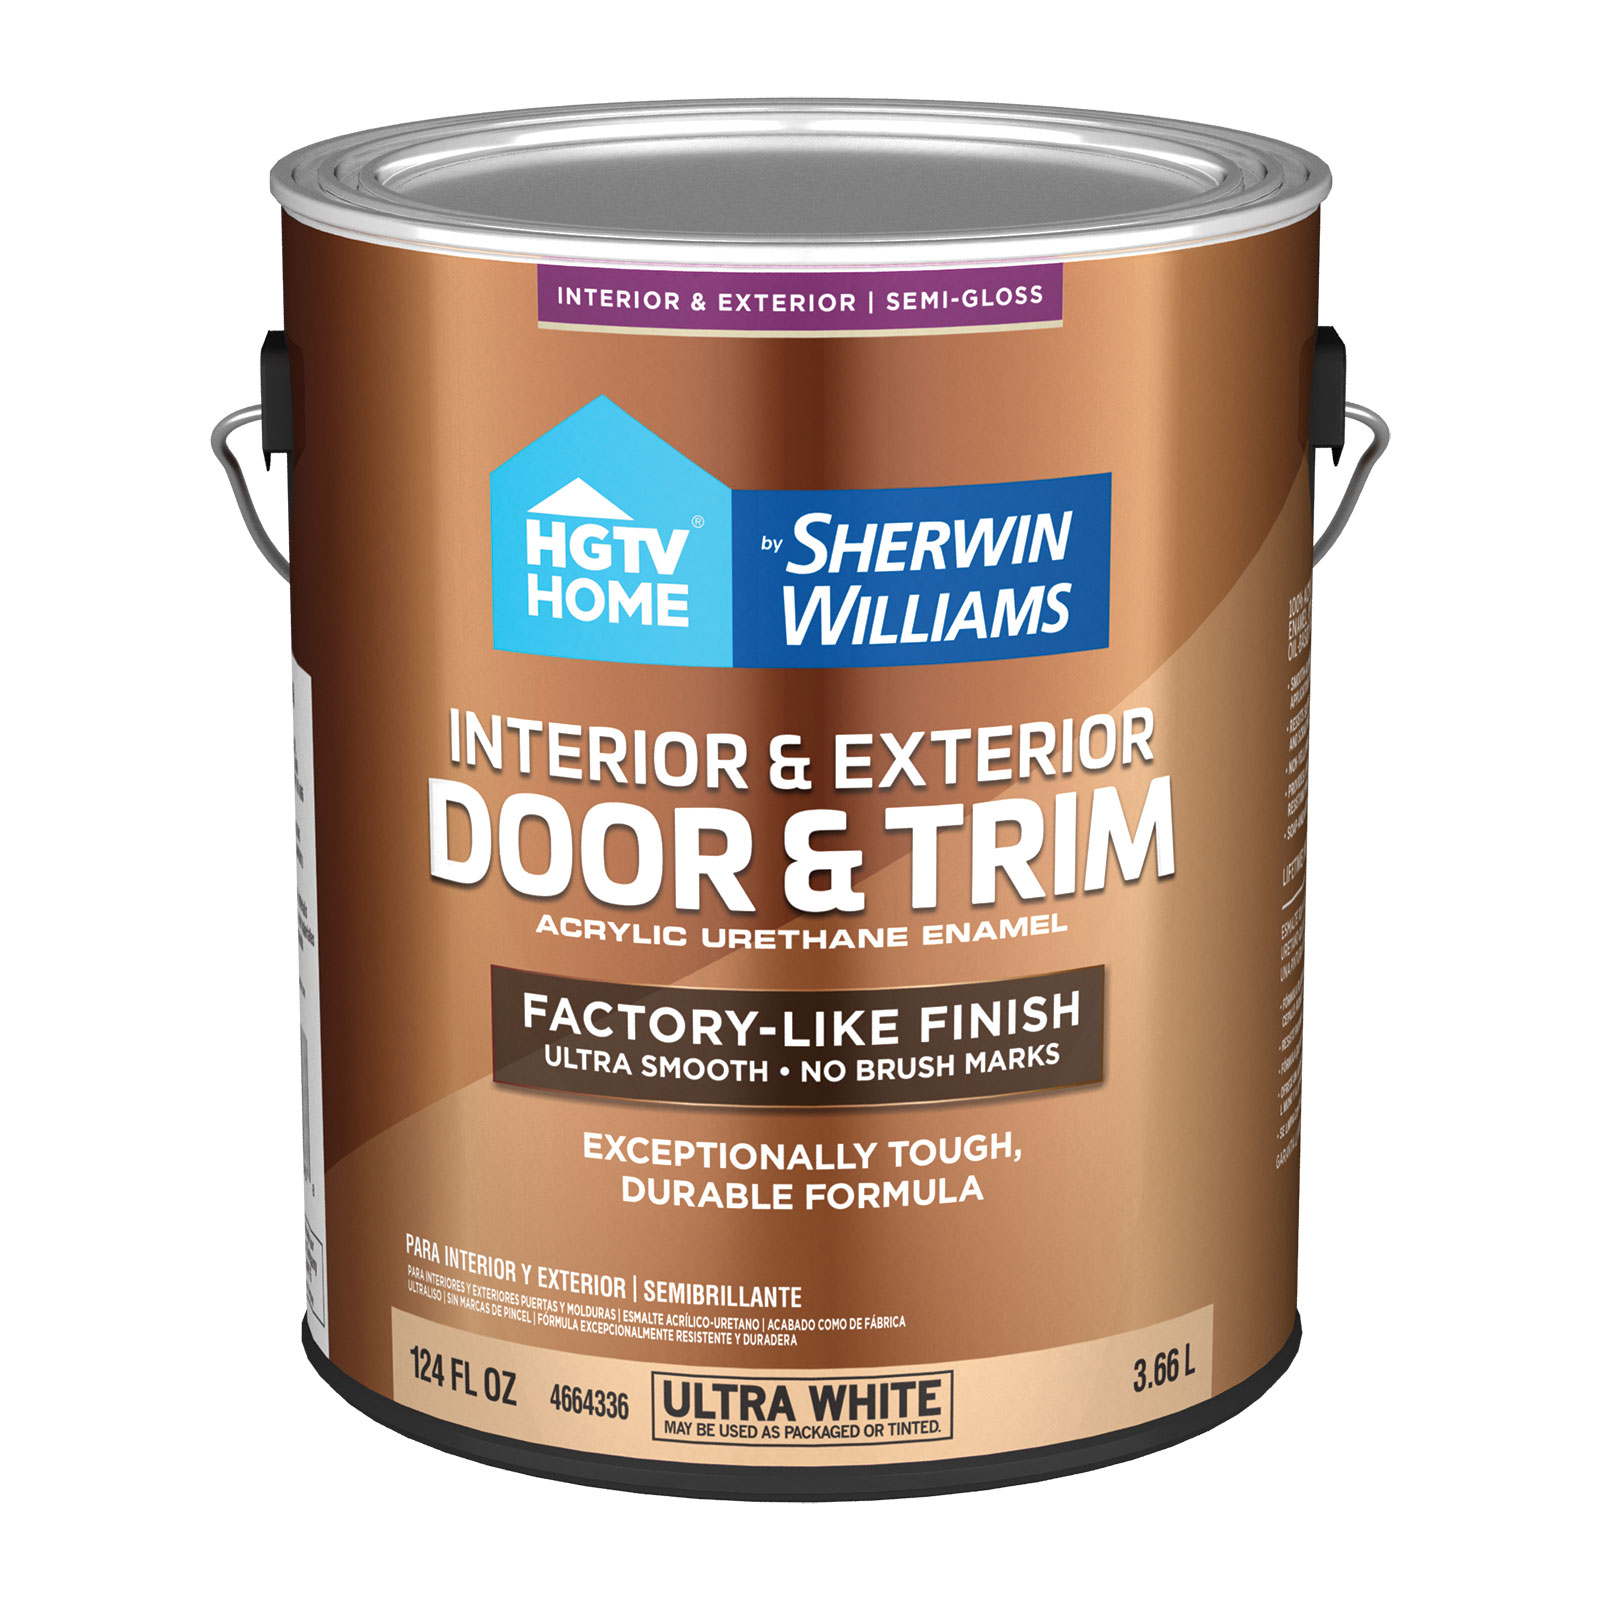 HGTV Home by Sherwin-Williams Semi-Gloss Ultra White Acrylic Interior/Exterior Door and Trim Paint (1-Gallon) | DT4664336-16